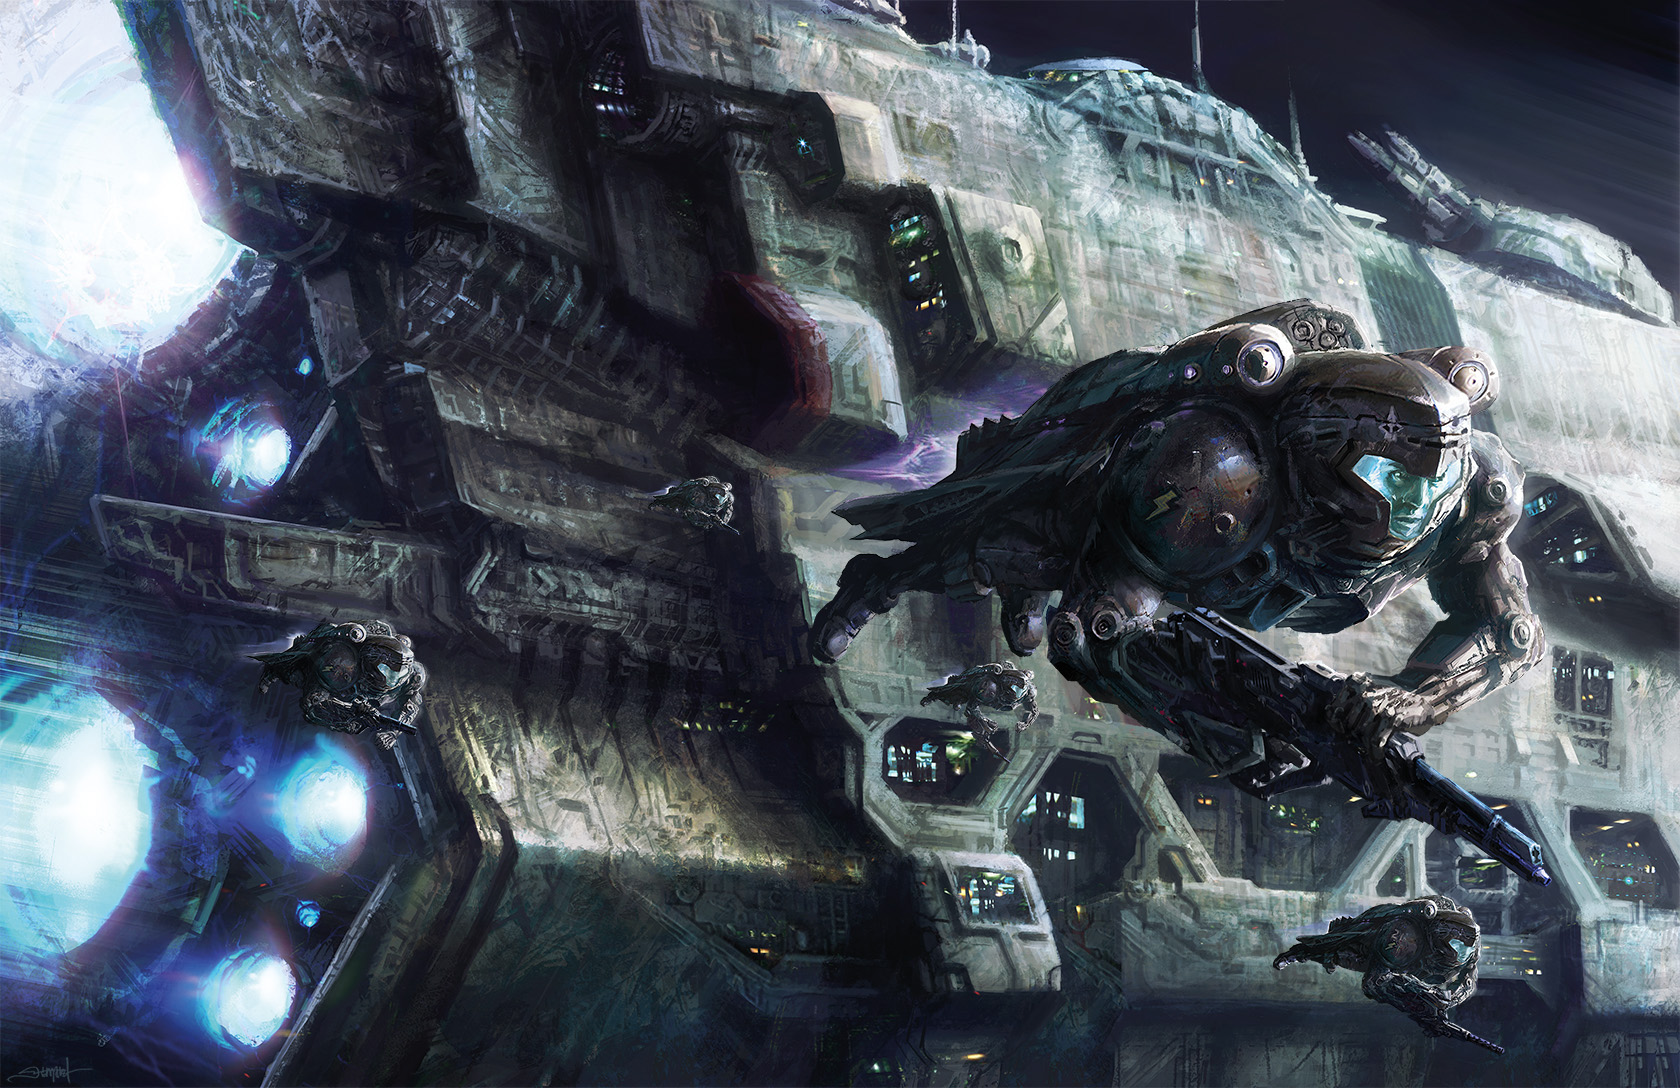 Sci Fi By David Demaret France Full Image Here Tools